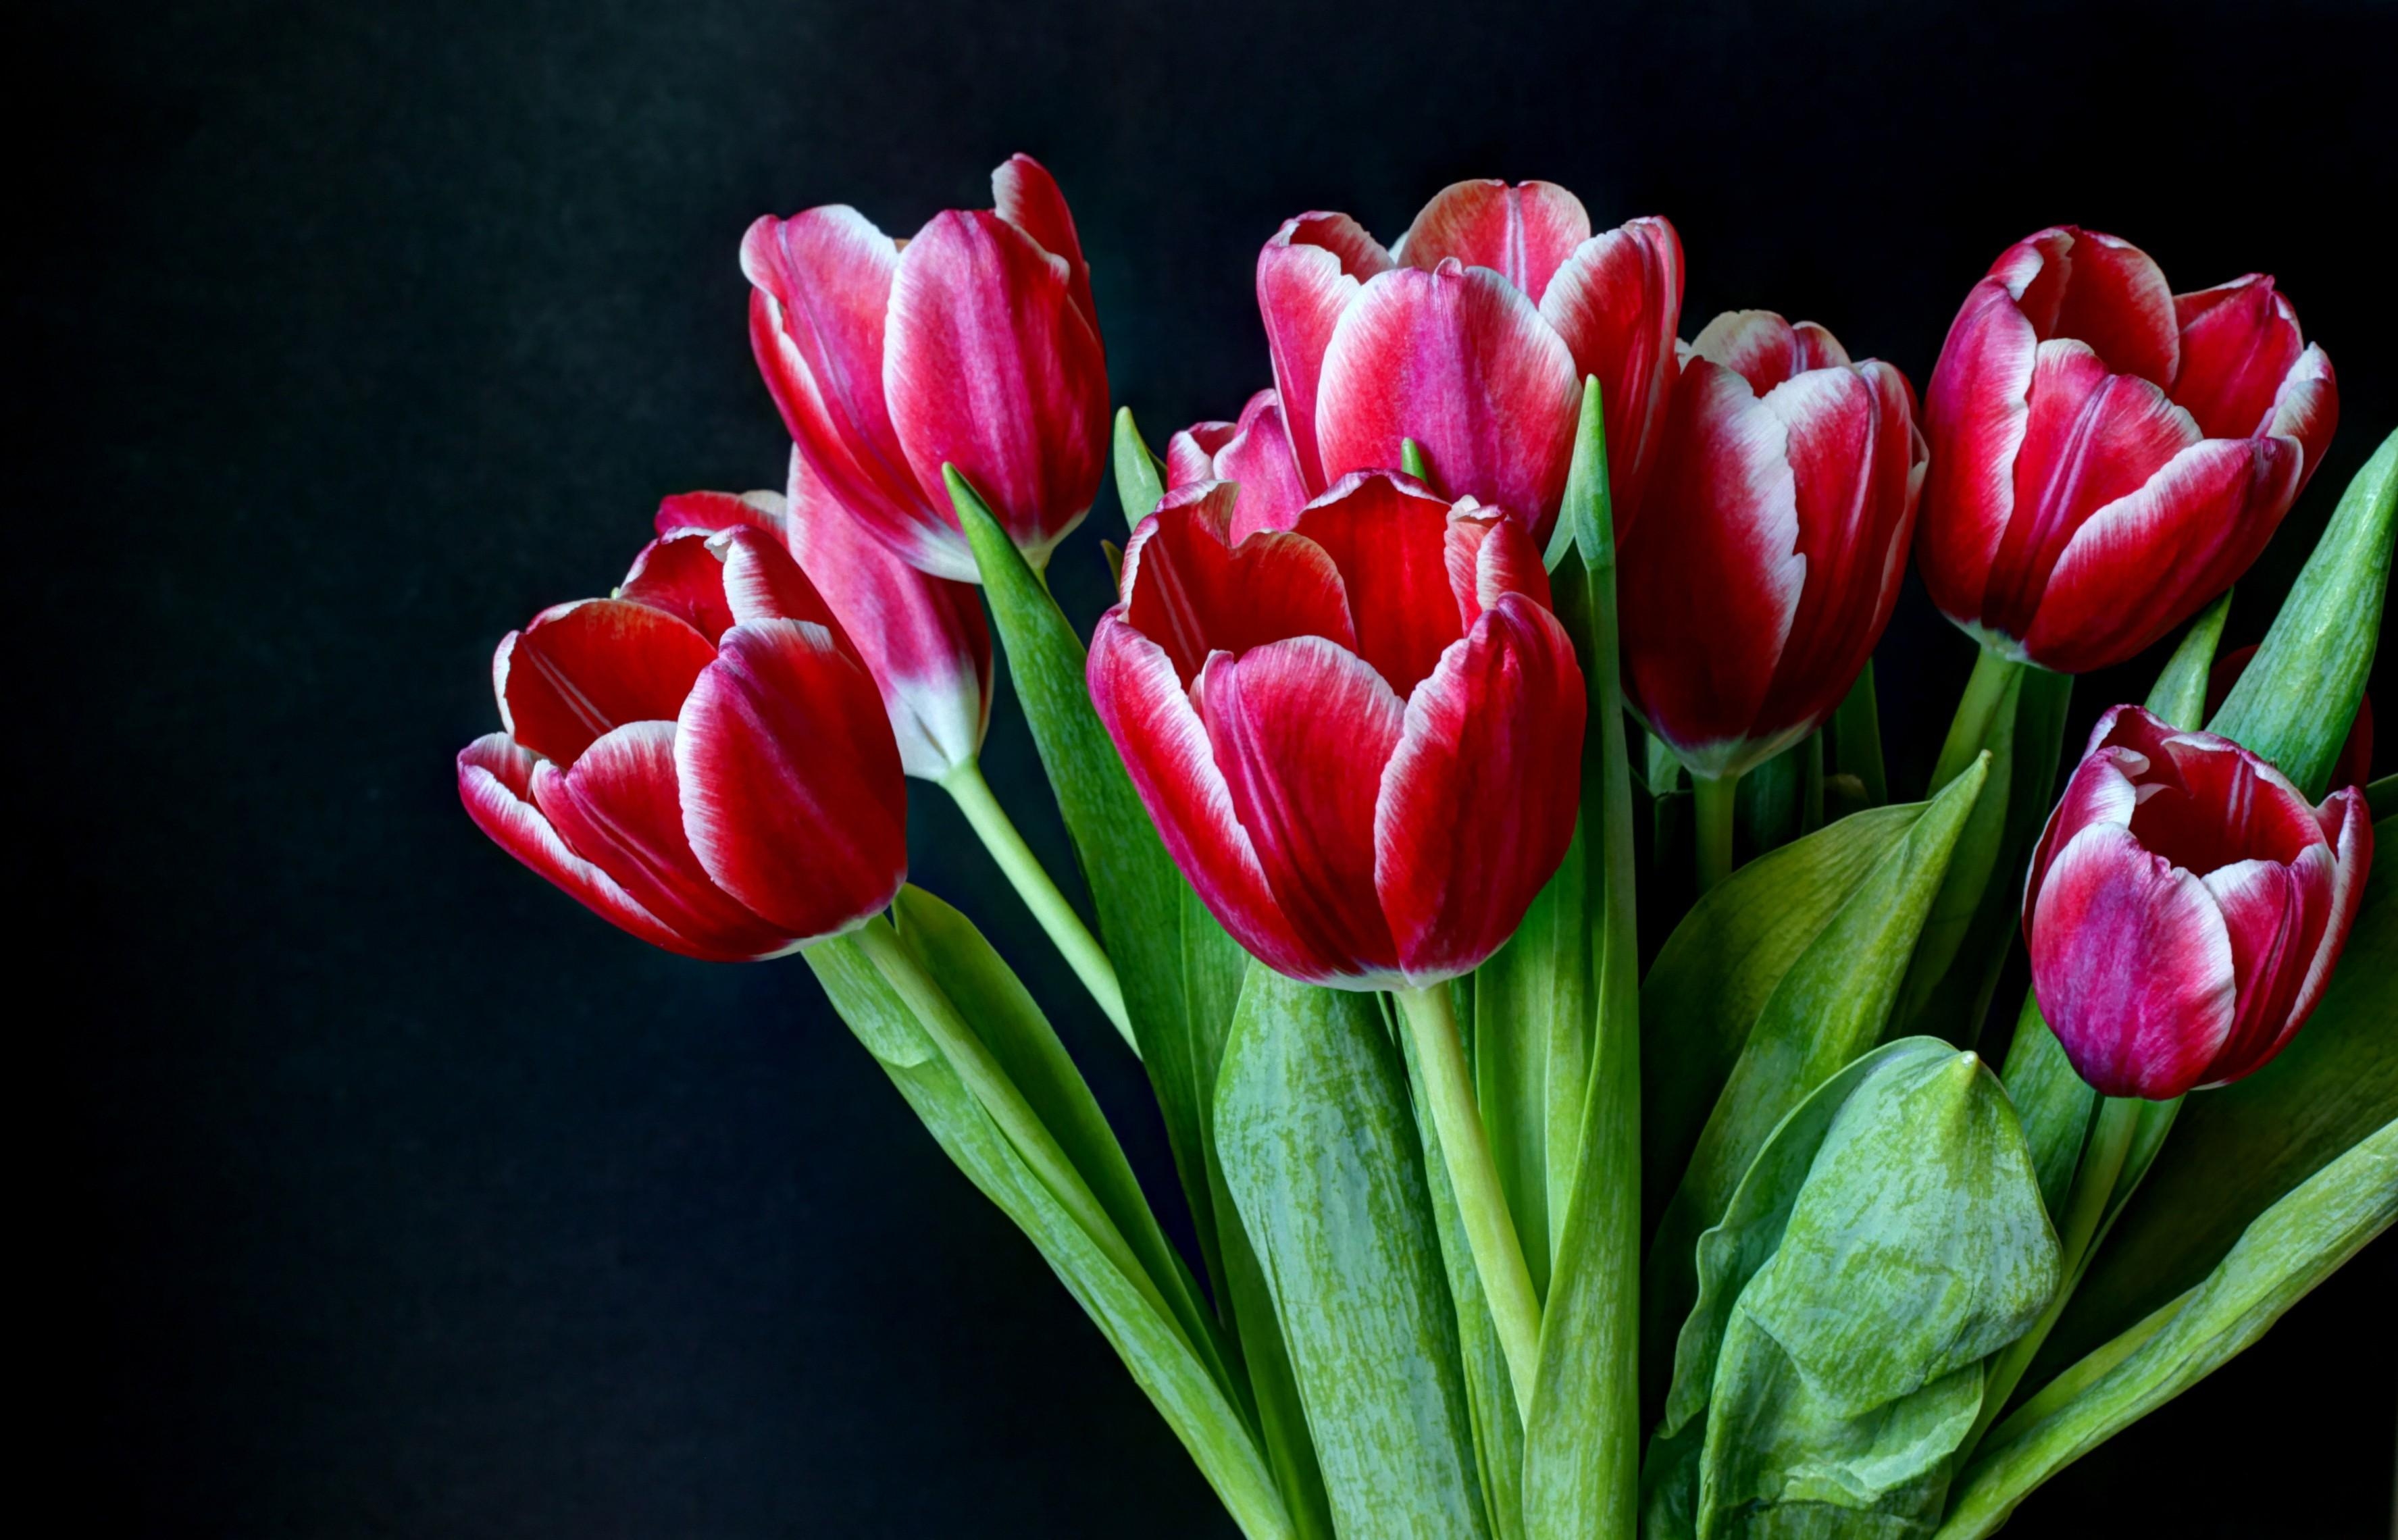 flowers, tulips, dark background, bouquet, bicolor, two colored